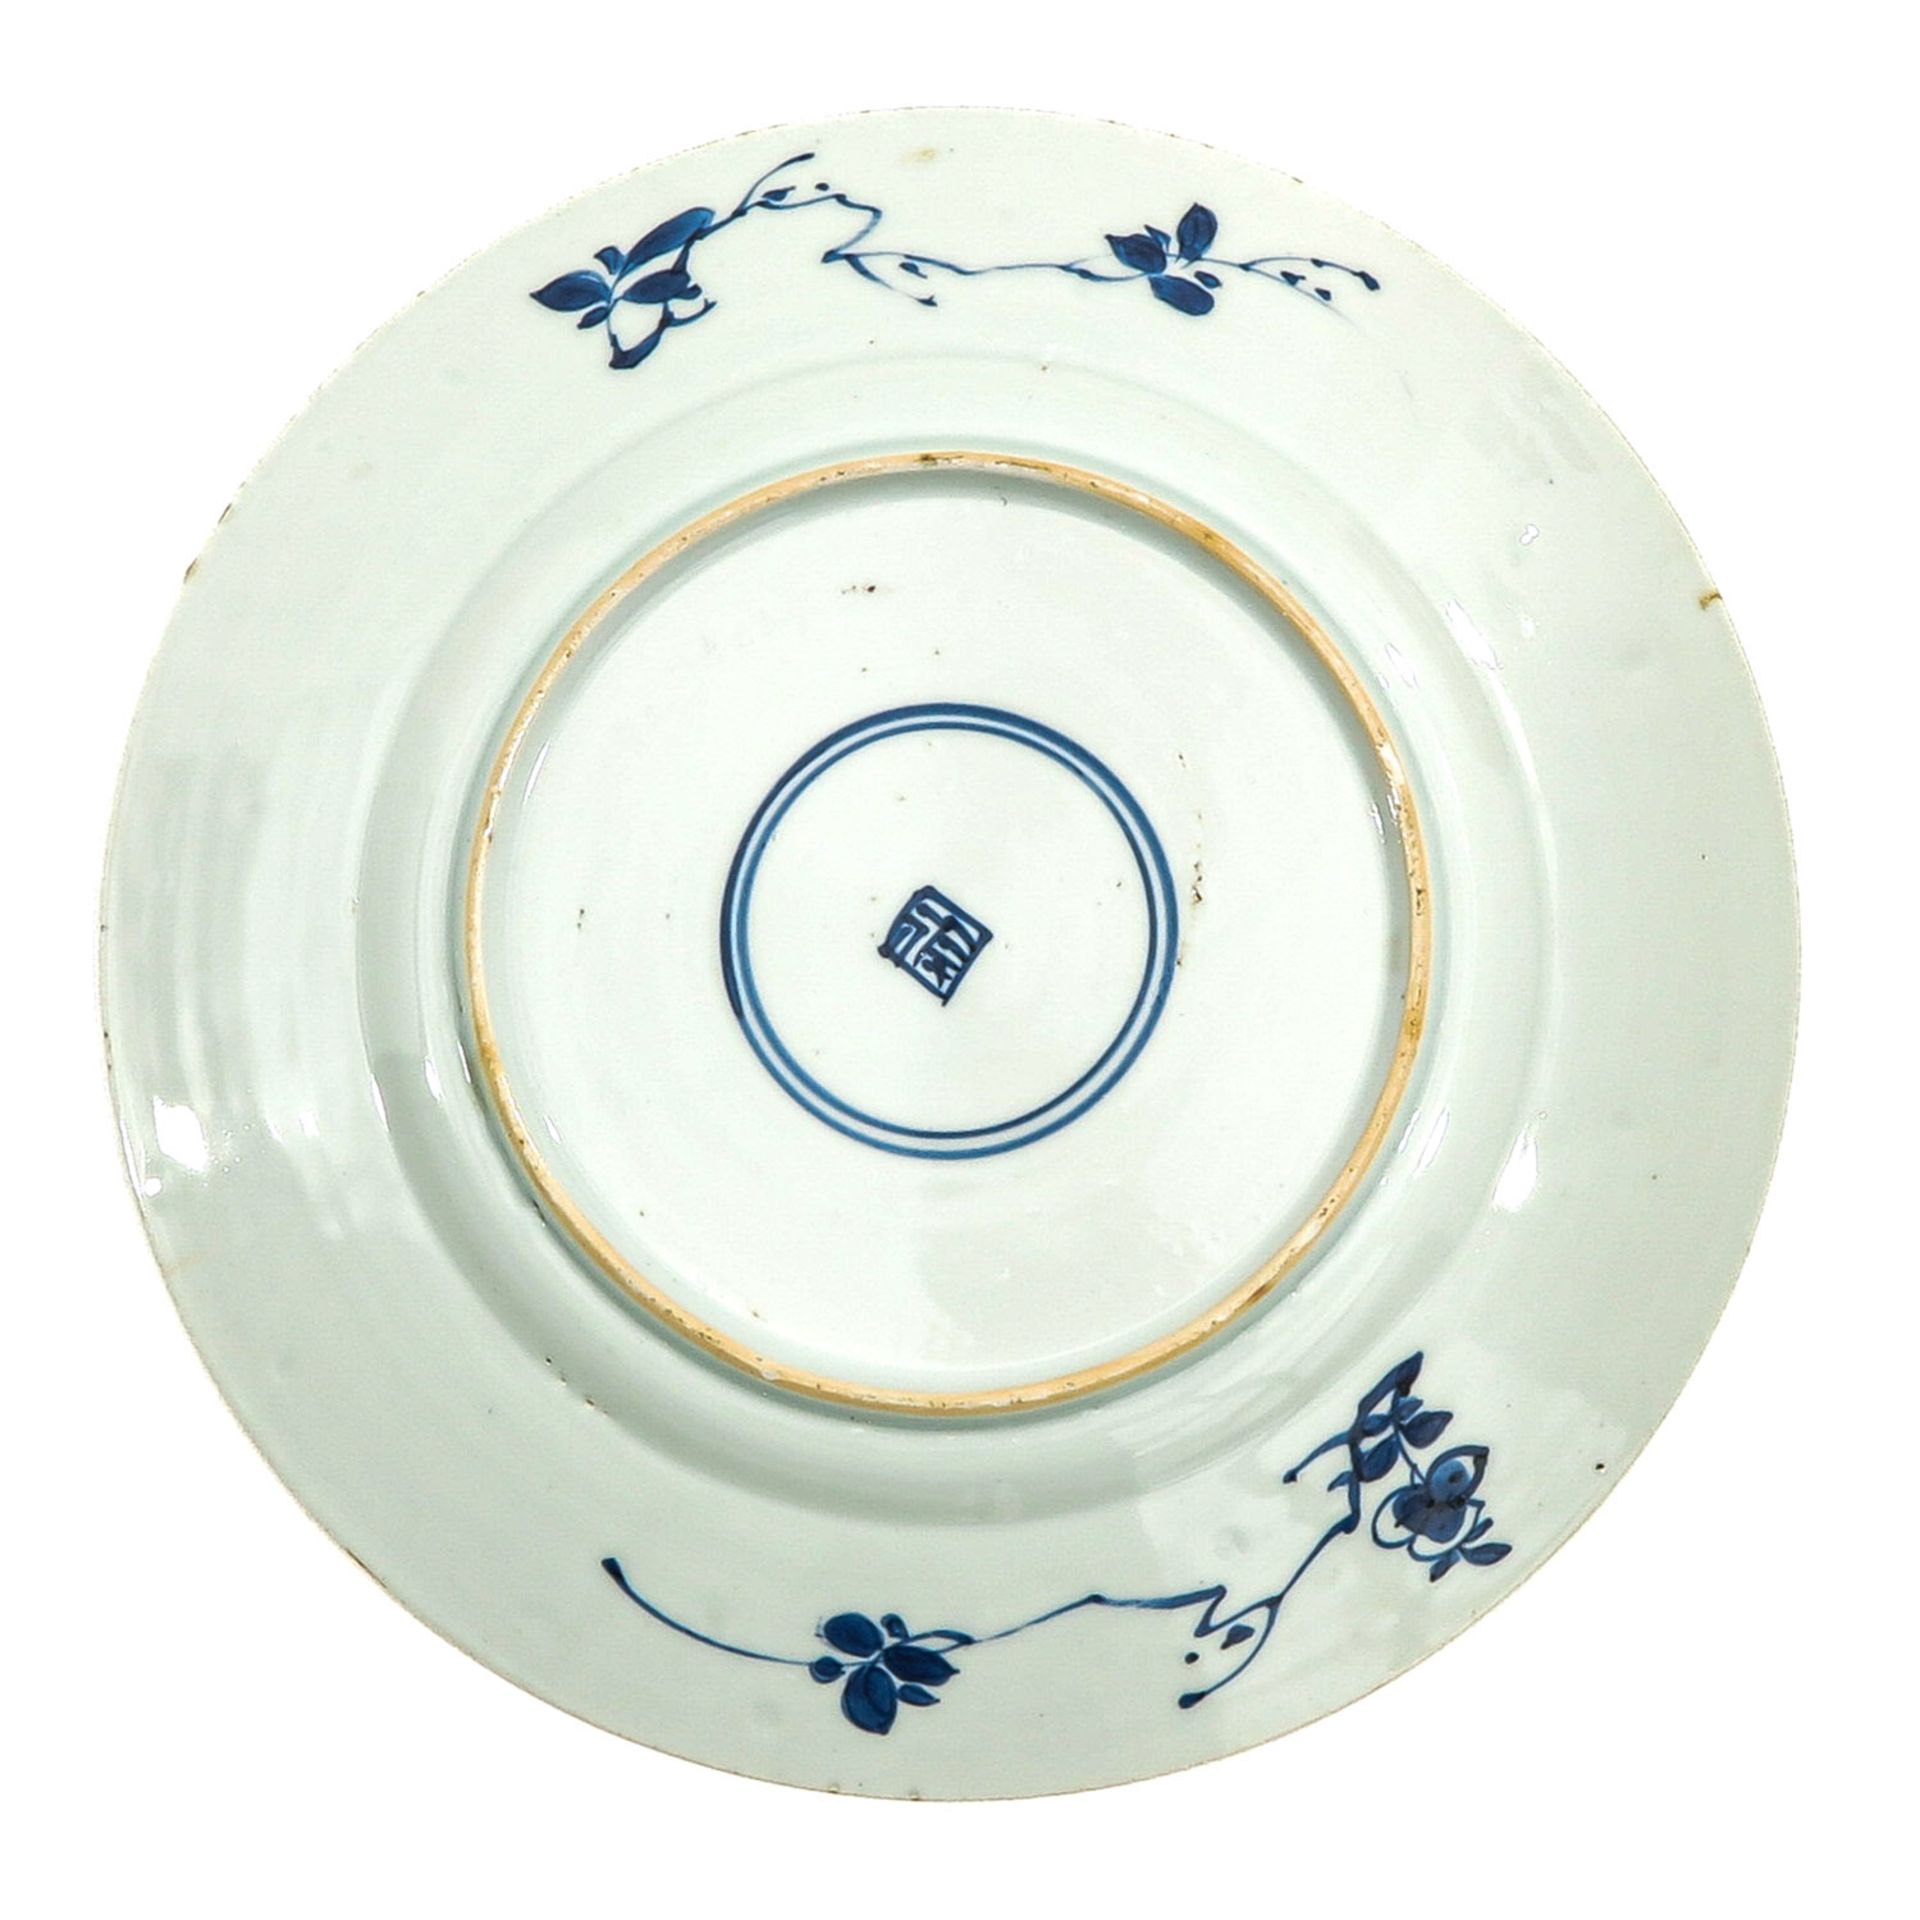 A Series of 5 Blue and White Plates - Bild 8 aus 10